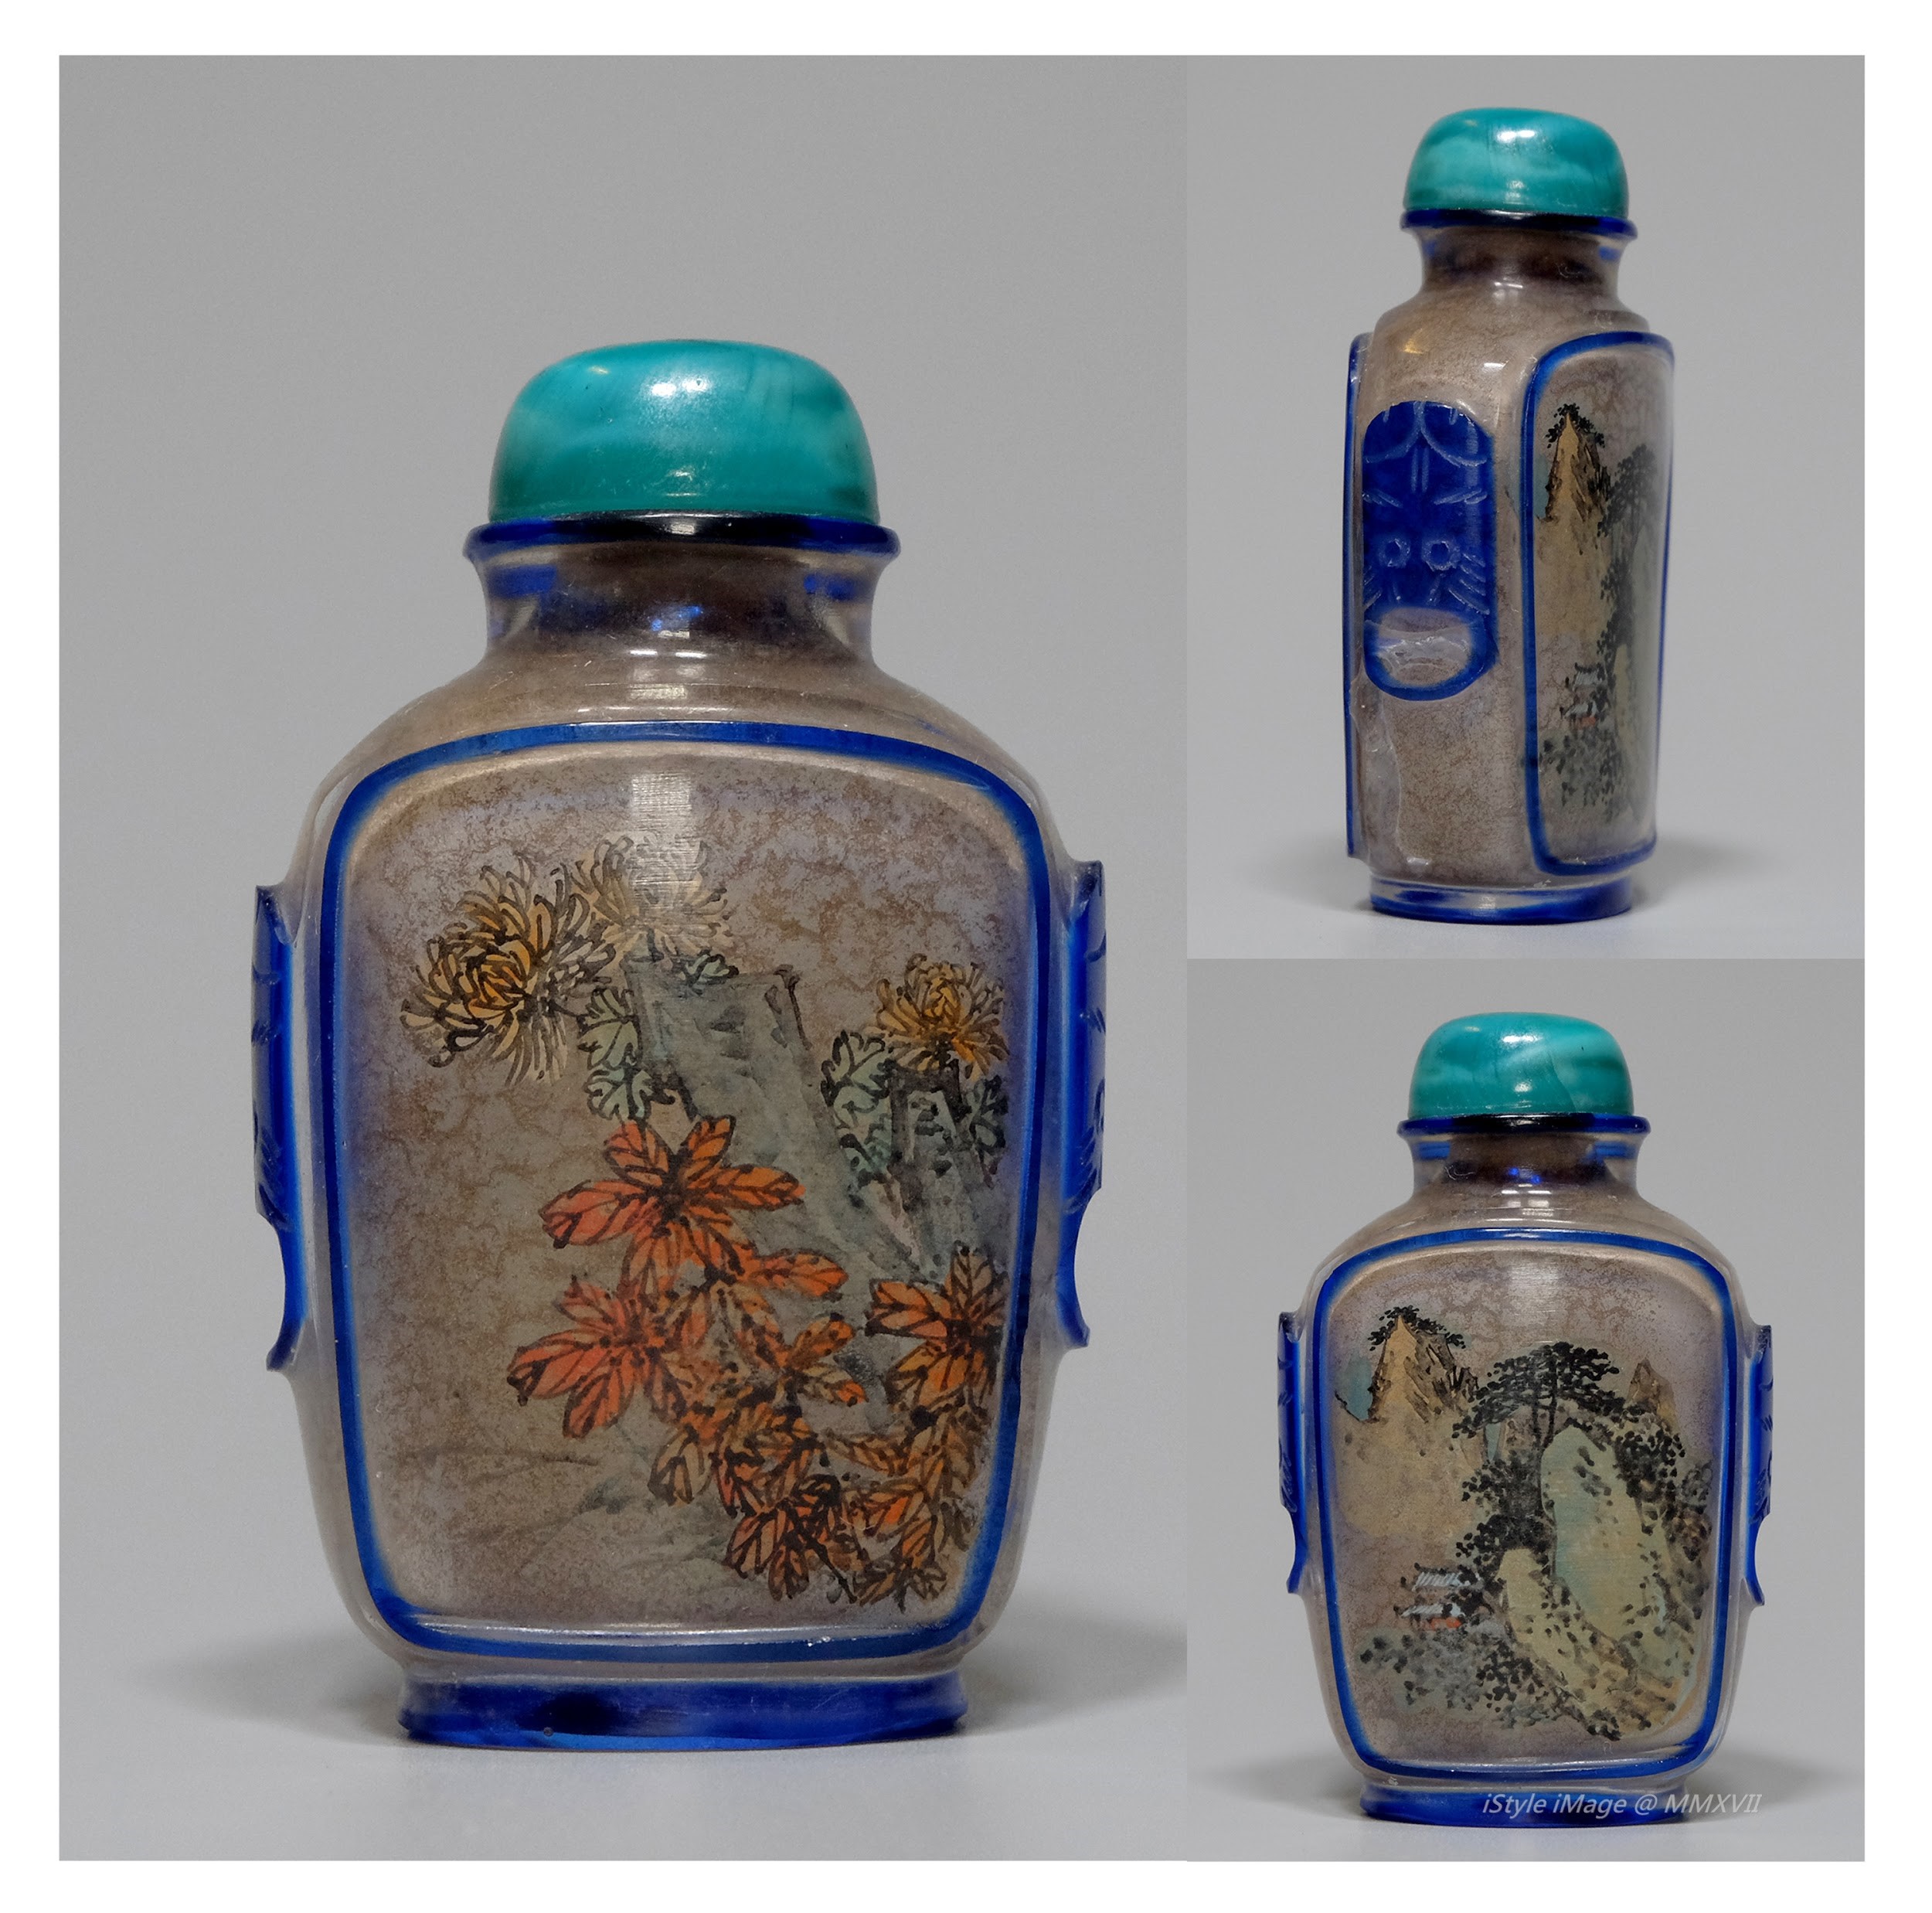 <br><h4>Lot 85 : A very unusual and fine inside-painted crystal snuff bottle (late Qing dynasty to Republic period)</h4>
				  Of flattened rectangular form and blue overlay frame, rising from a flat oval base, flanked by blue overlay ring handles issuing from lion masks, intricately painted on the interior of both sides with mountainous and flowering landscape.  With turquoise type glass stopper, and spoon.
					<br>Measurements (H) high 6.6 CM, (T) thick 2 CM, (W)width 4.3 CM<br><br><br>非常罕見和精細的內繪水晶煙壺  ( 晚清至民國時期 )<br>扁平長方形壺，藍色疊層框，從平坦的橢圓形基座上升，兩側是藍色疊層獅子環手柄，內部繪有山景和花景。 配綠松石型玻璃塞和勺子。<br>尺寸(H)高 6.6 厘米, (T)深 2 厘米, (W)濶4.3 厘米